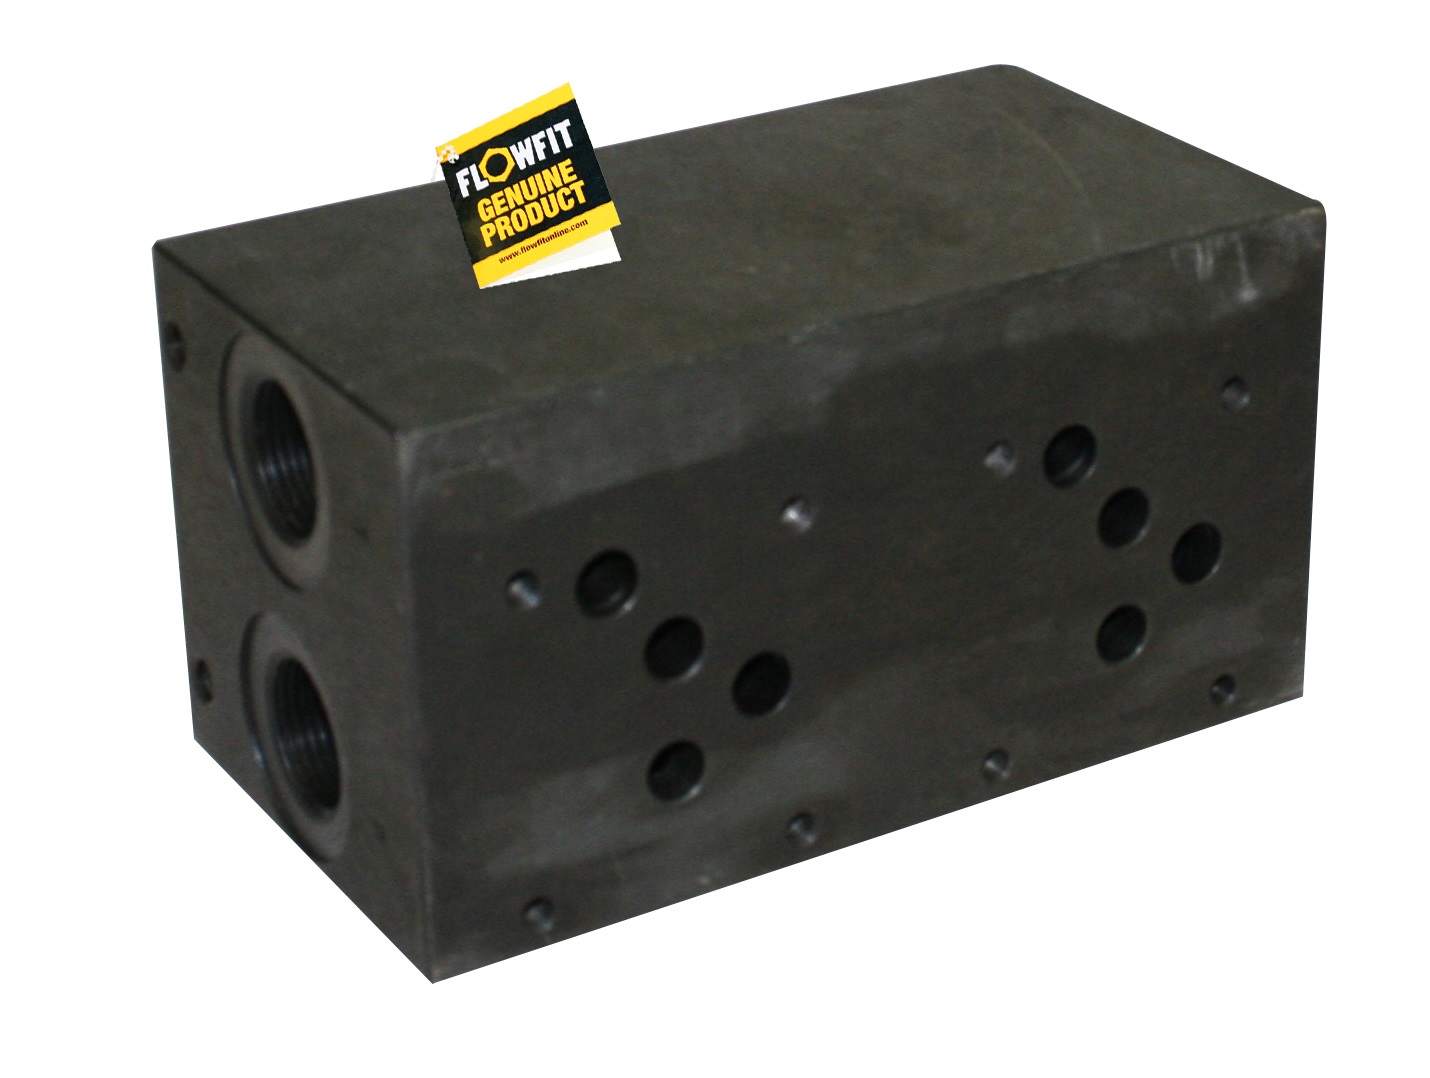 Flowfit hydraulic cetop 5 9 station steel manifold with relief valve cavity